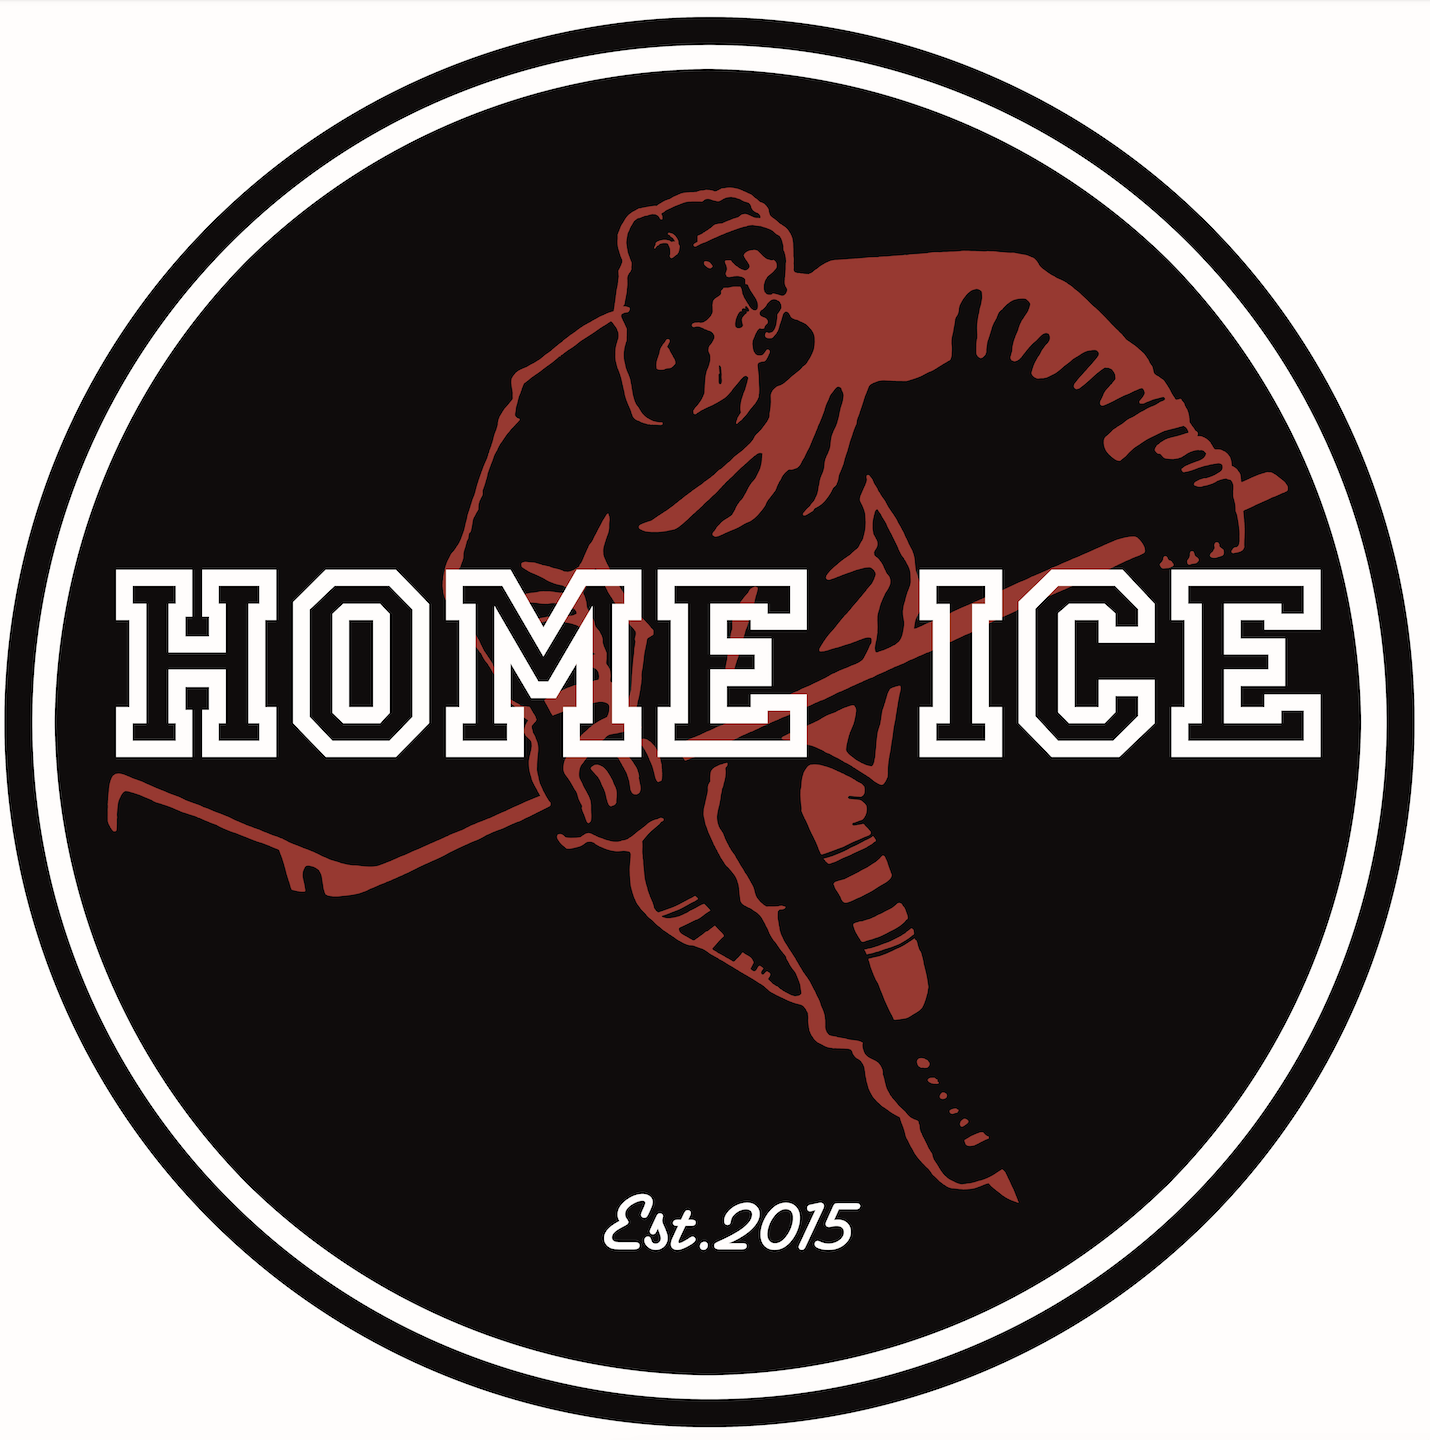 Home Ice currently operates the hockey pro shop at the North Shore Ice Arena in Northbrook, and will continue to be part of the Home Ice business.